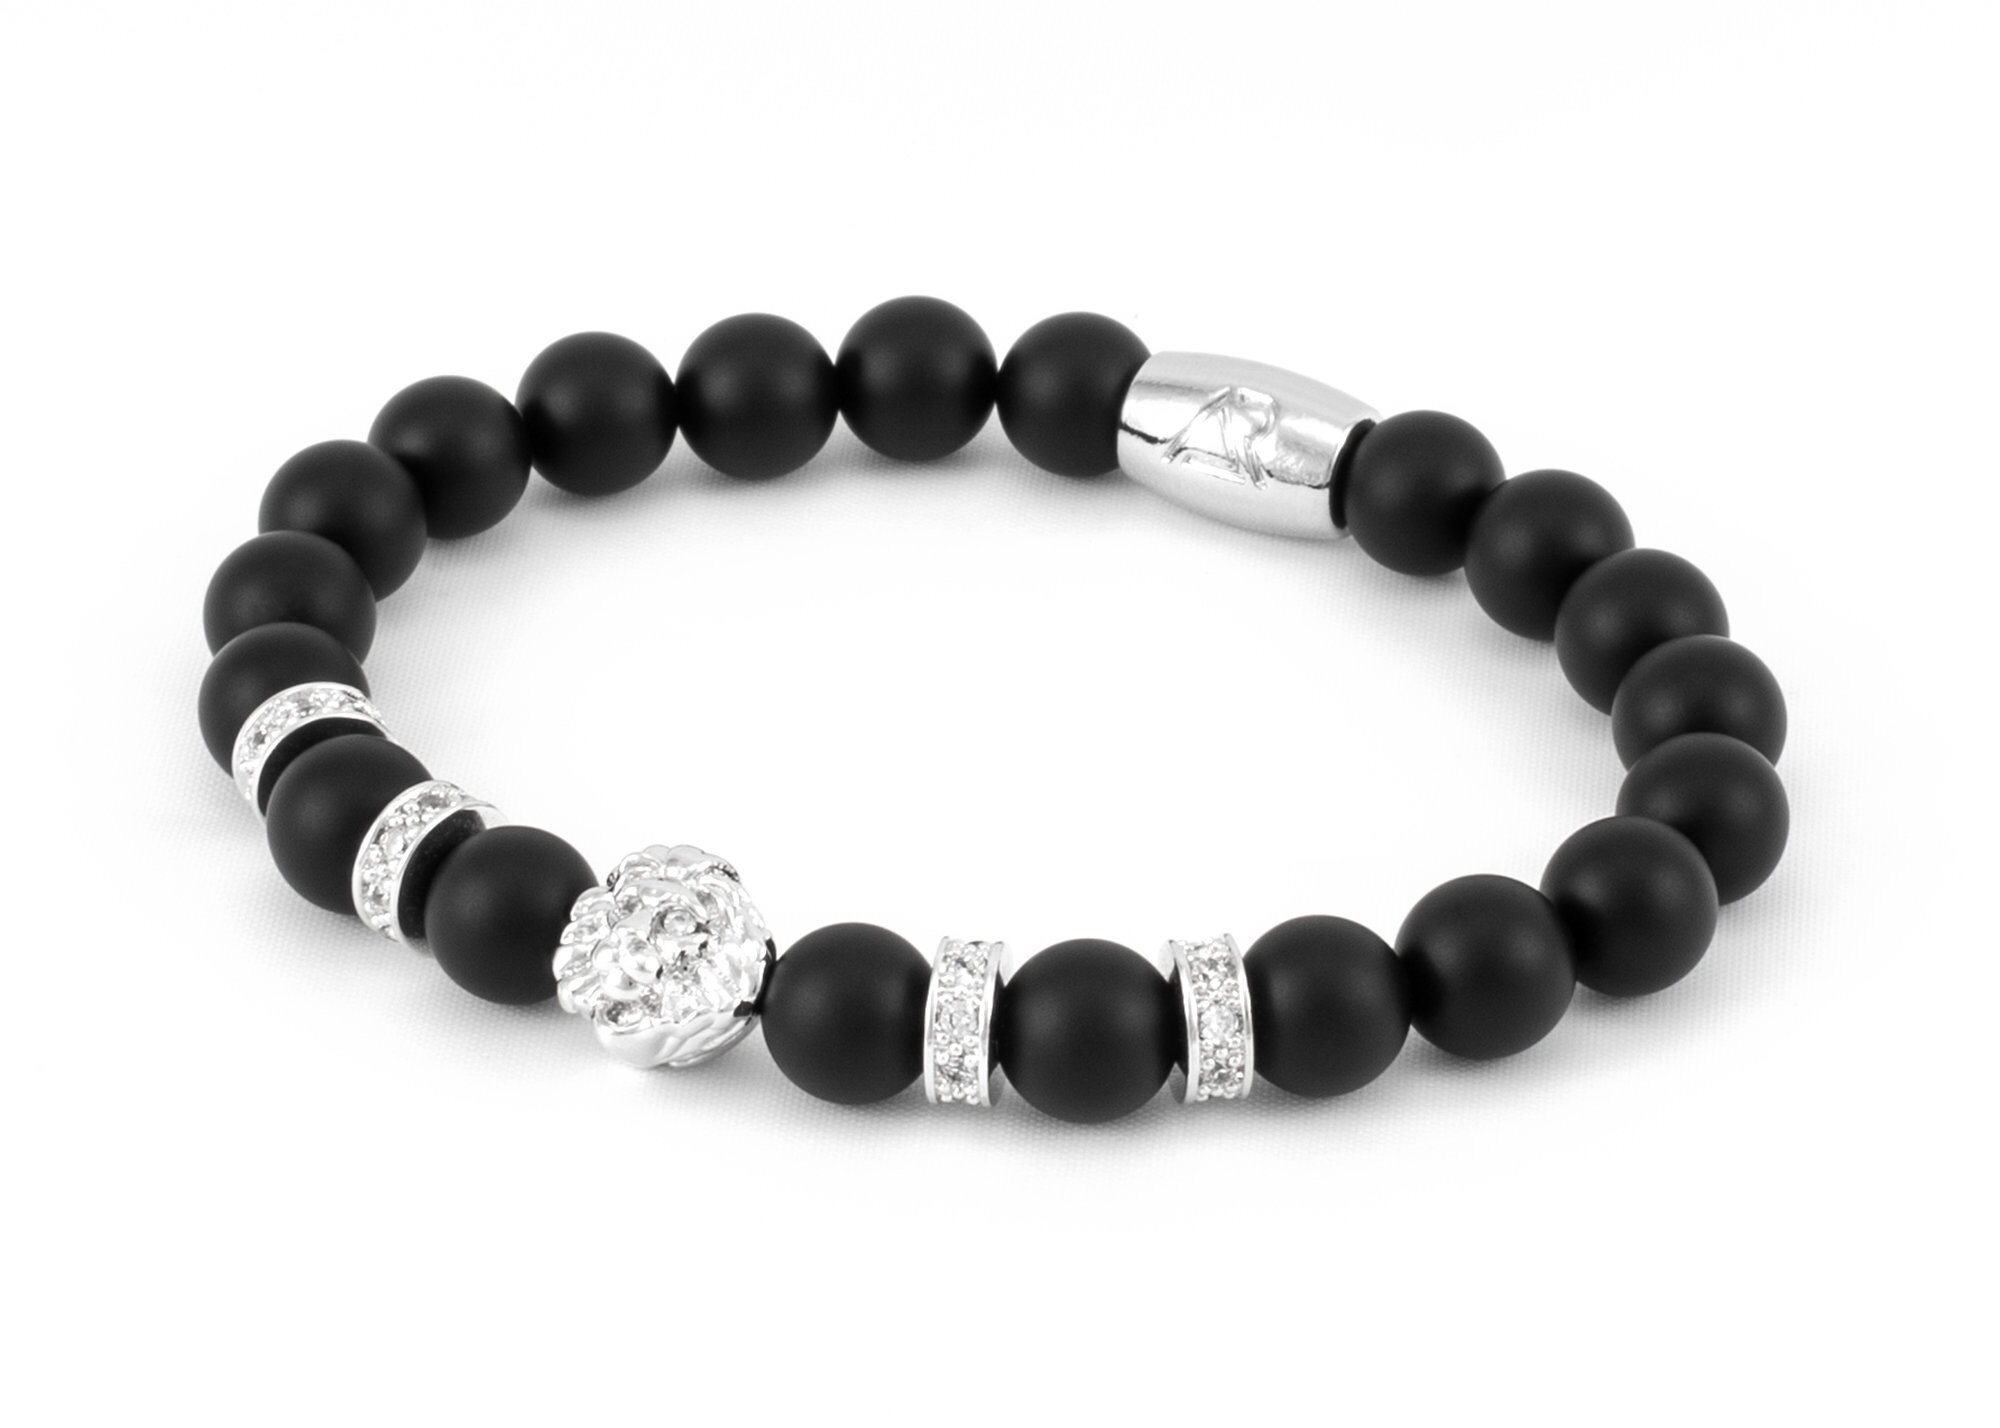 Silver Lion White Marble Beads Bracelet - QUISENZ